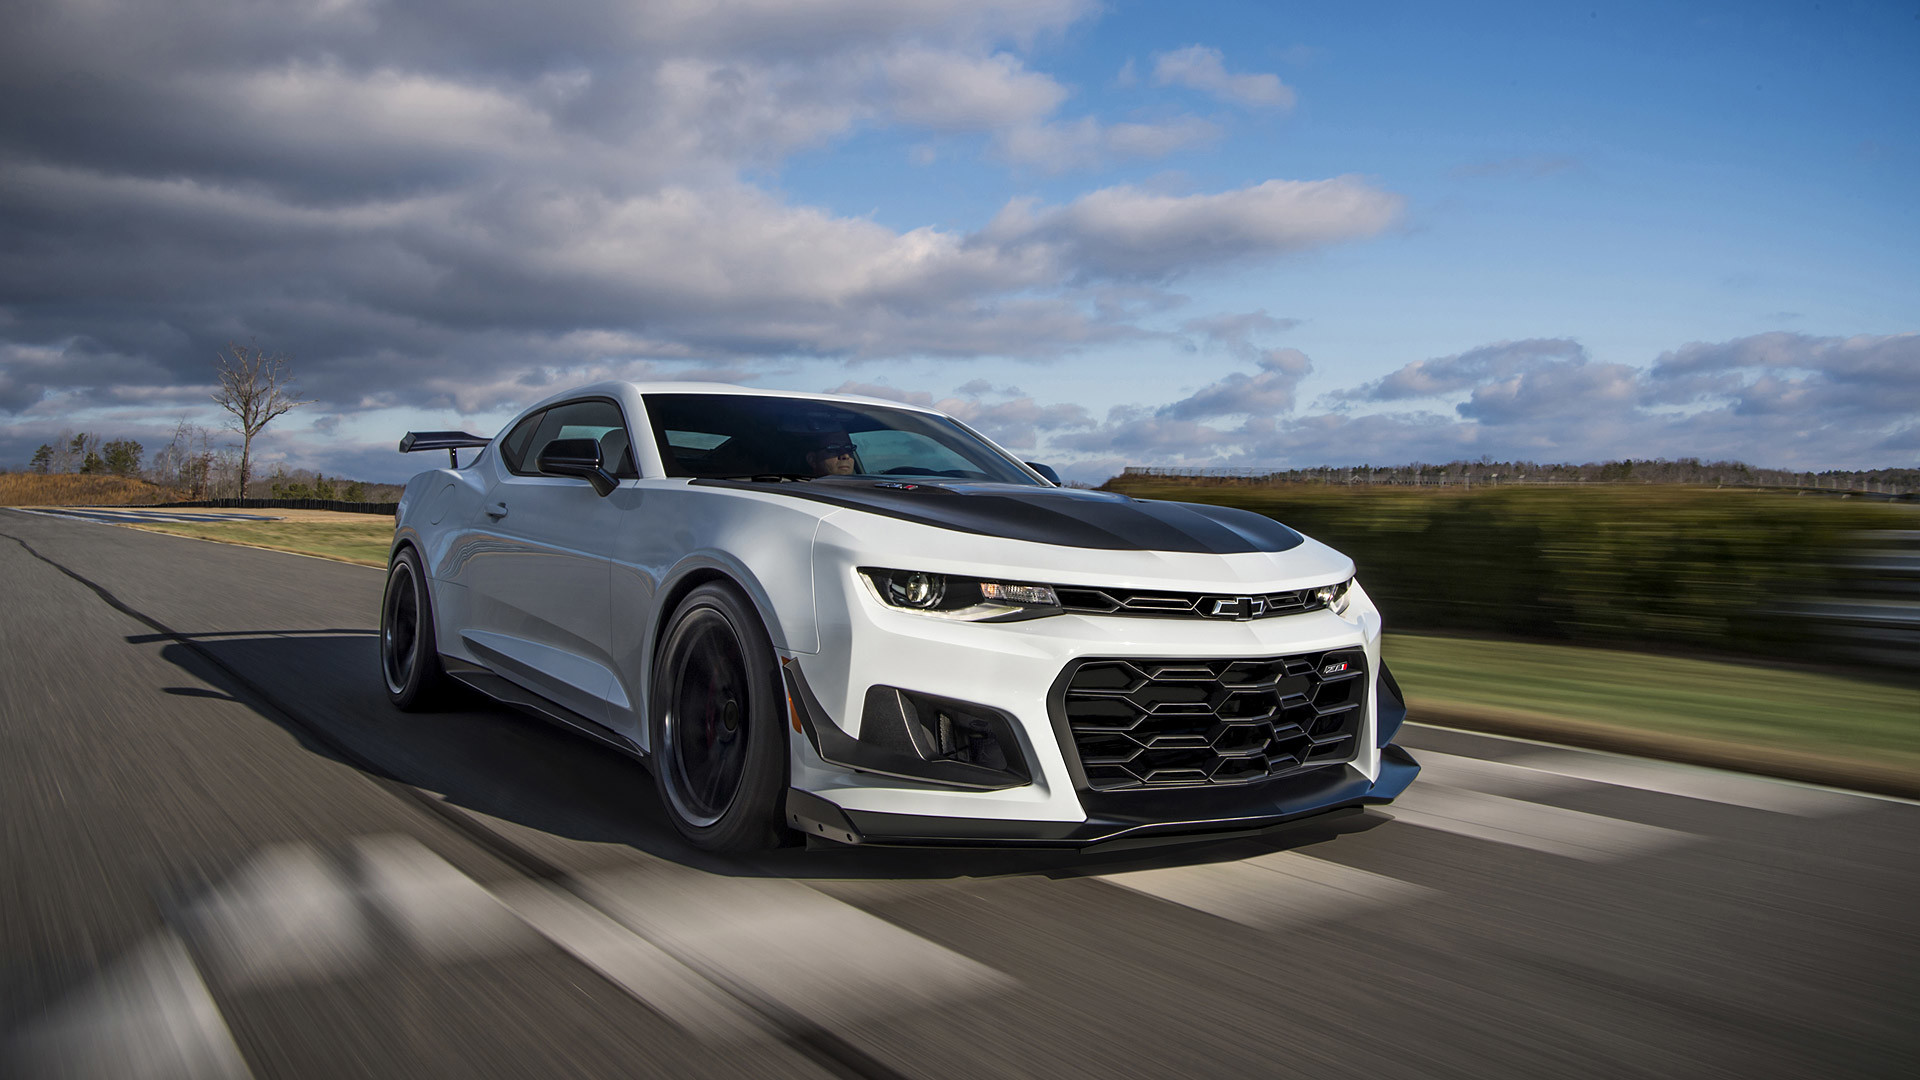 2018 Chevrolet Camaro Zl1 1le Picture 
 Data Src Cool - Supercharged Chevy Camaro 2018 - HD Wallpaper 